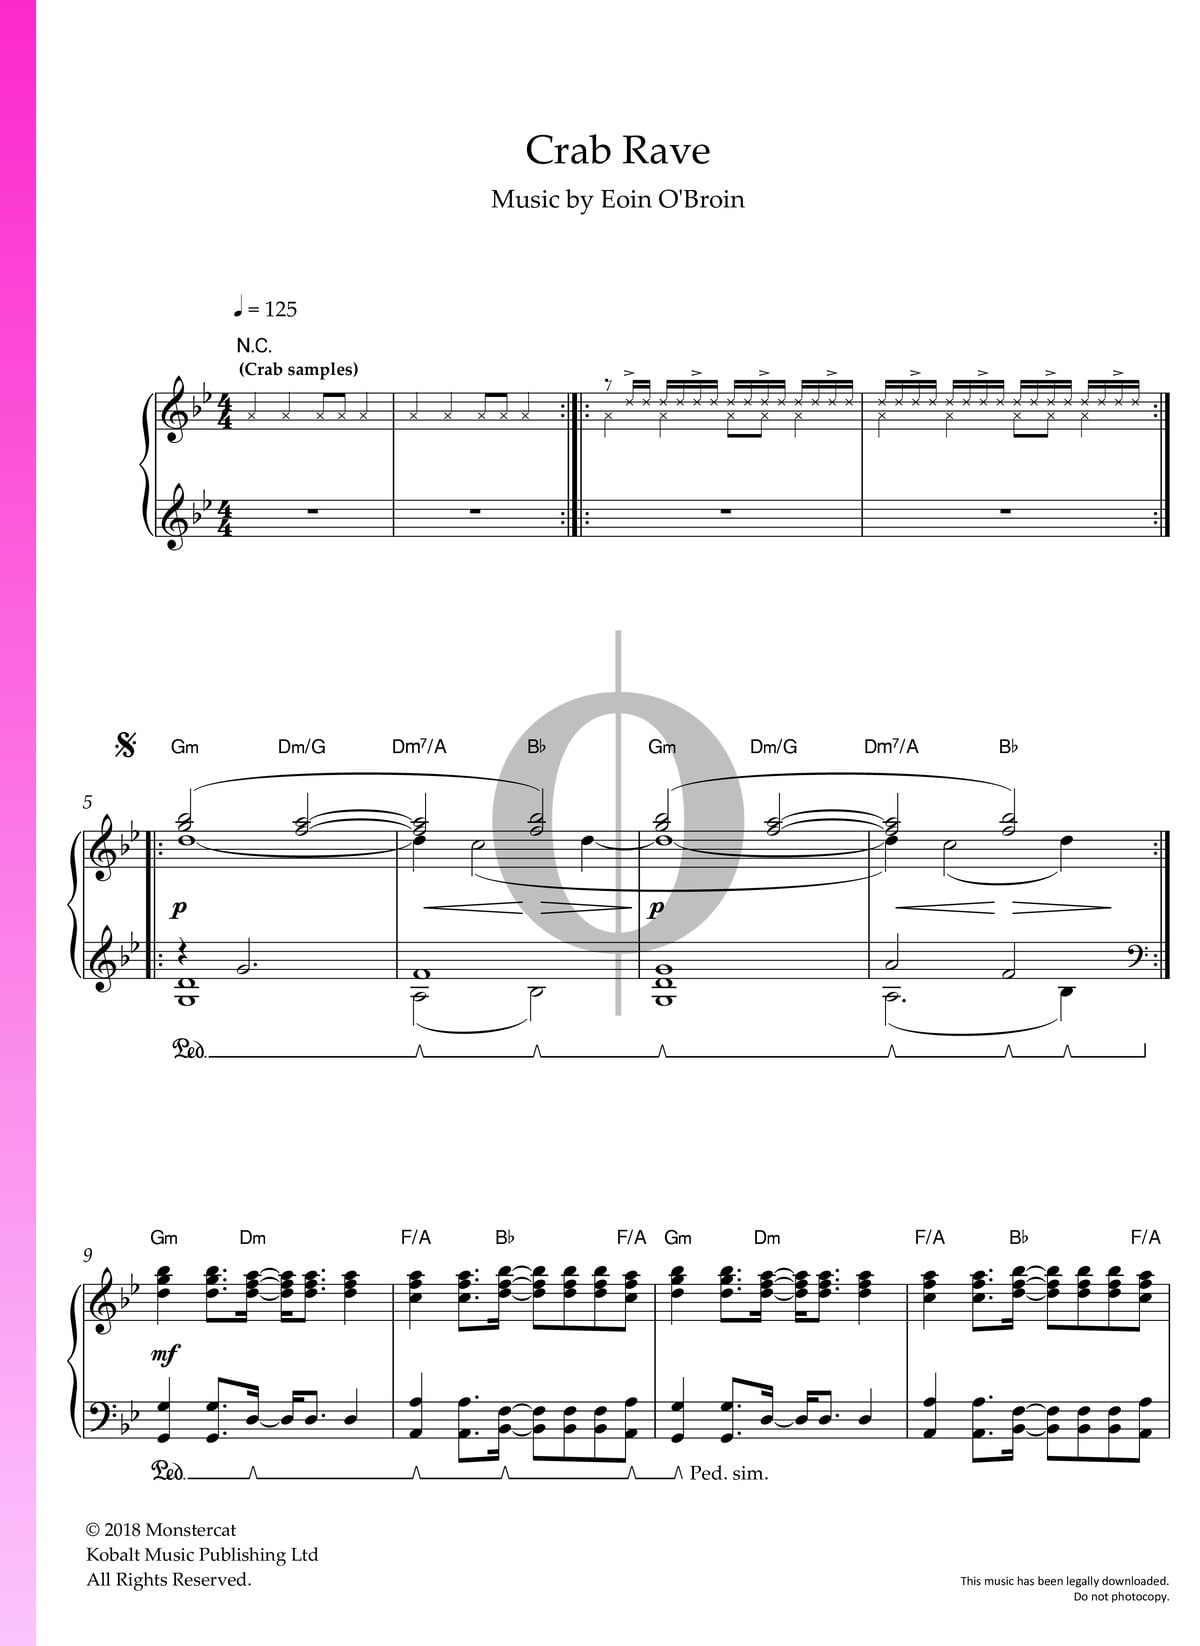 Crab Rave Sheet Music Piano Solo Pdf Download Streaming